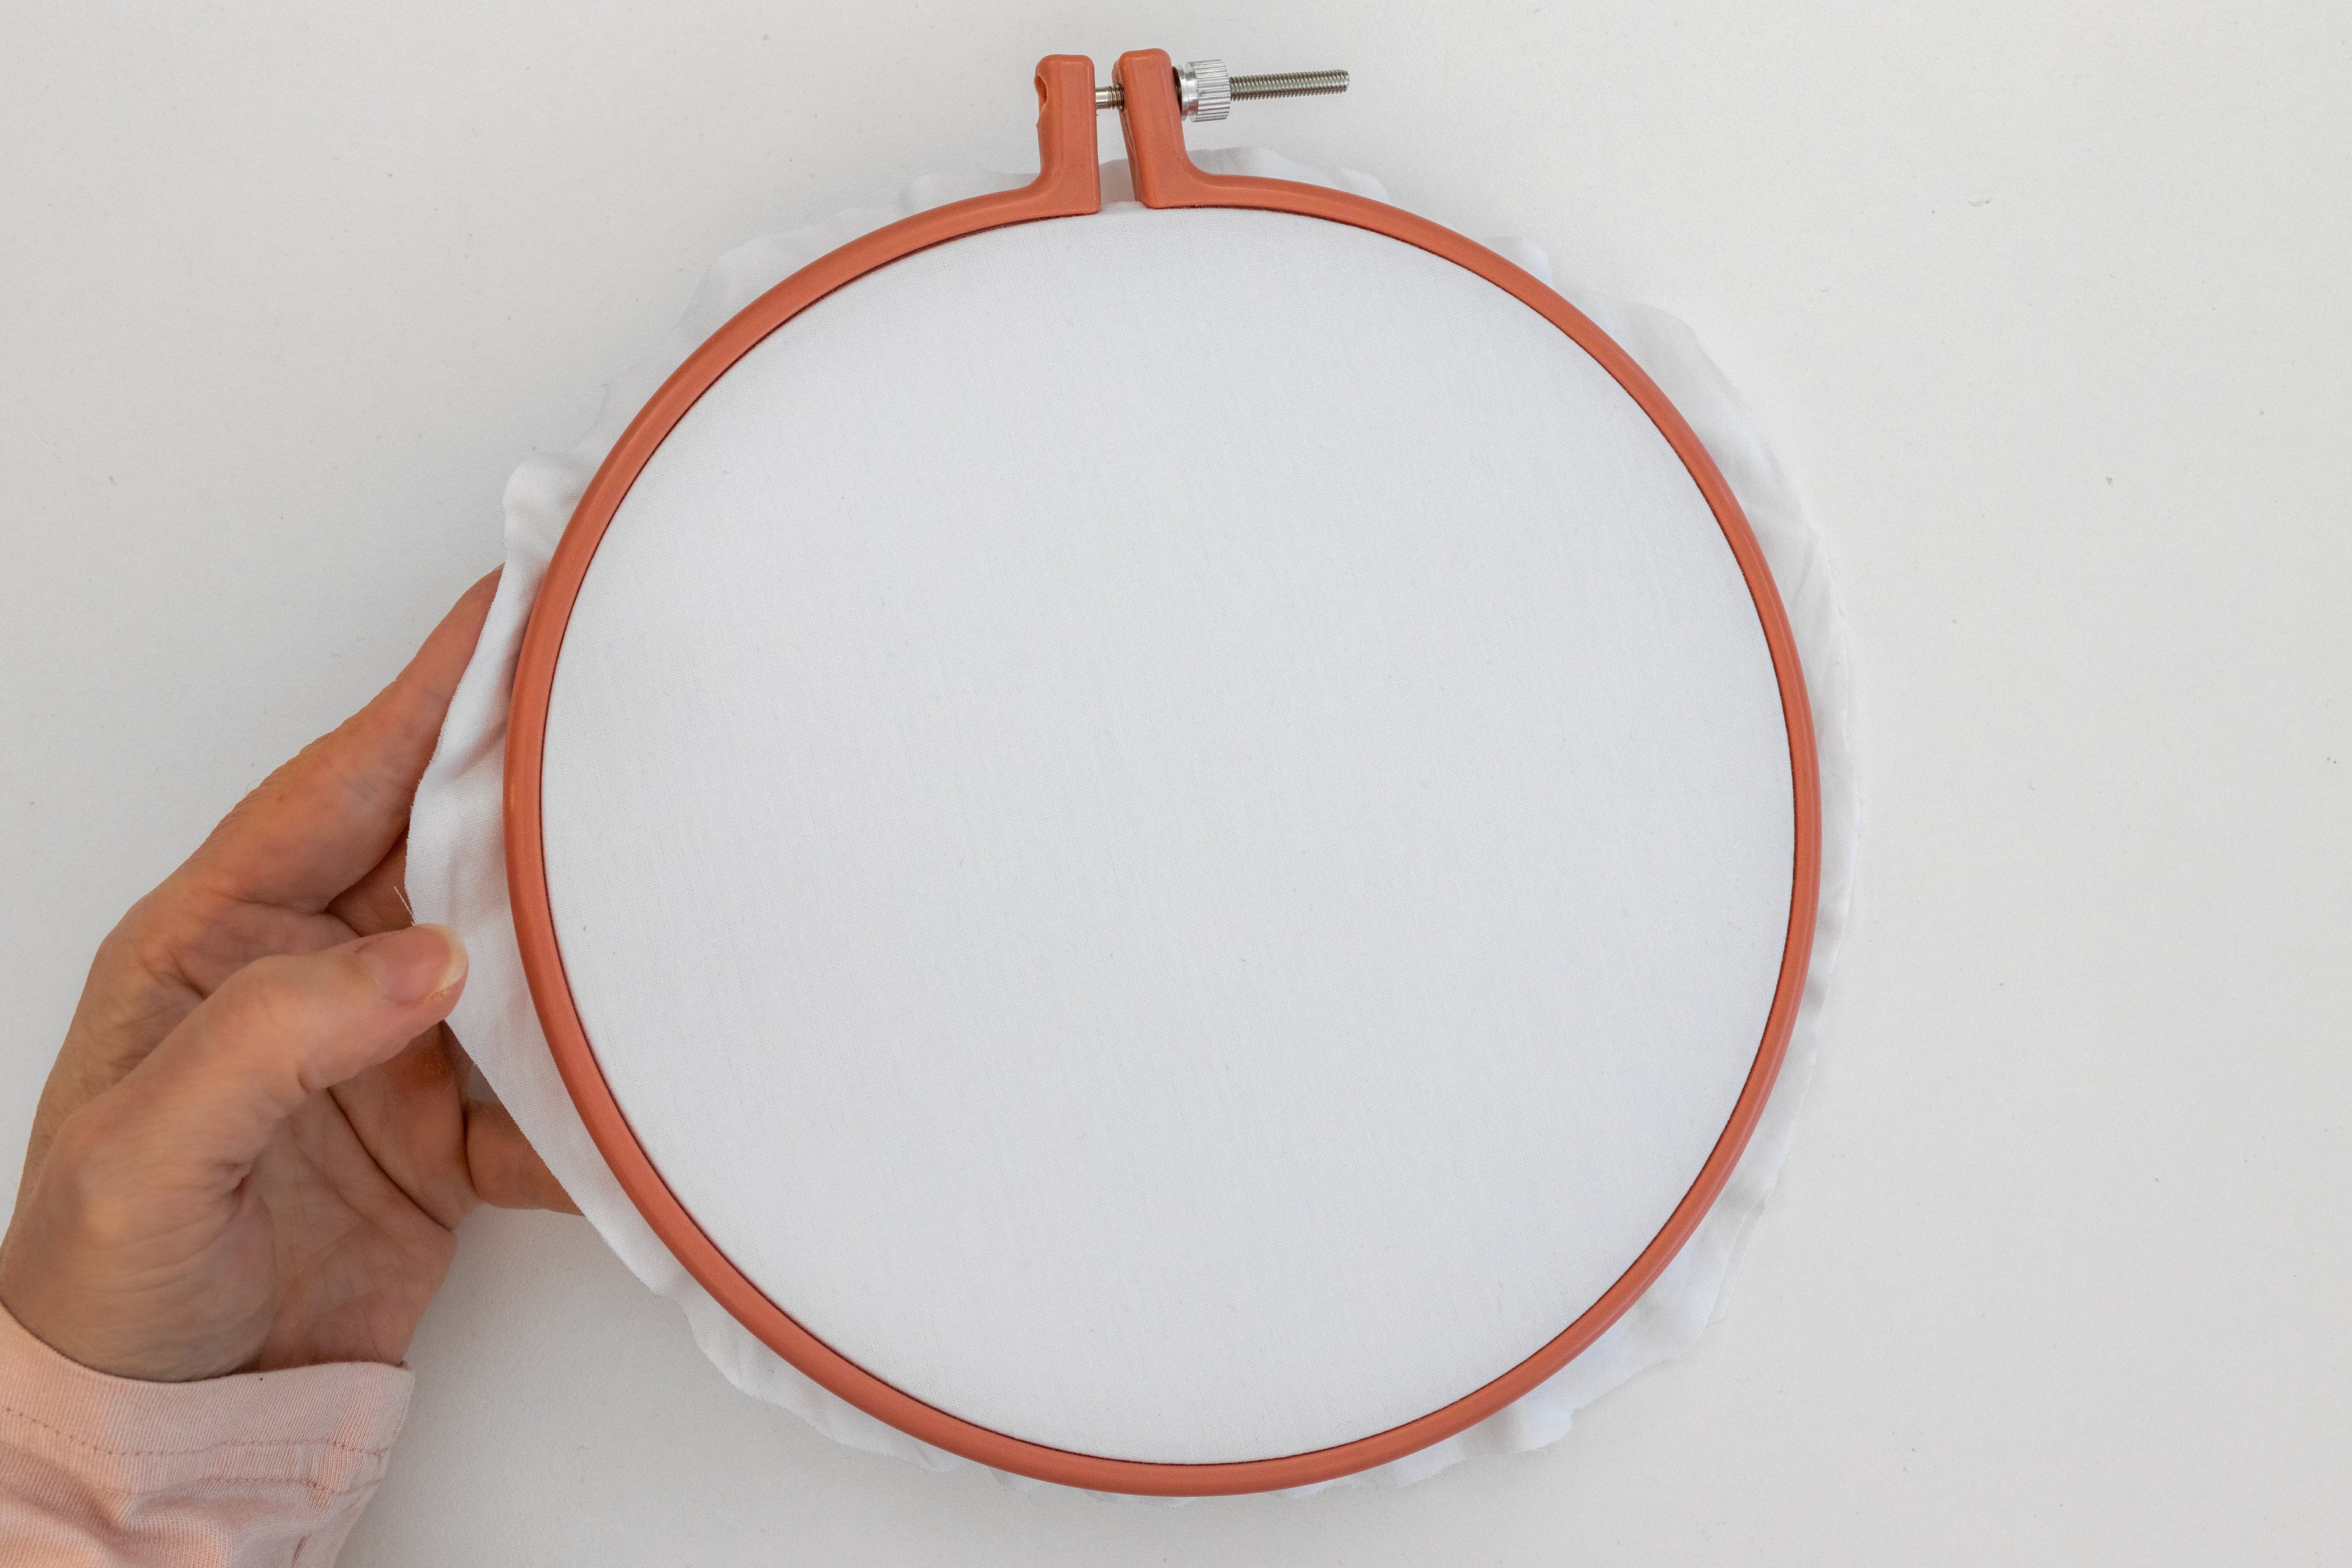 A hand holds a hoop with tightened fabric in it.